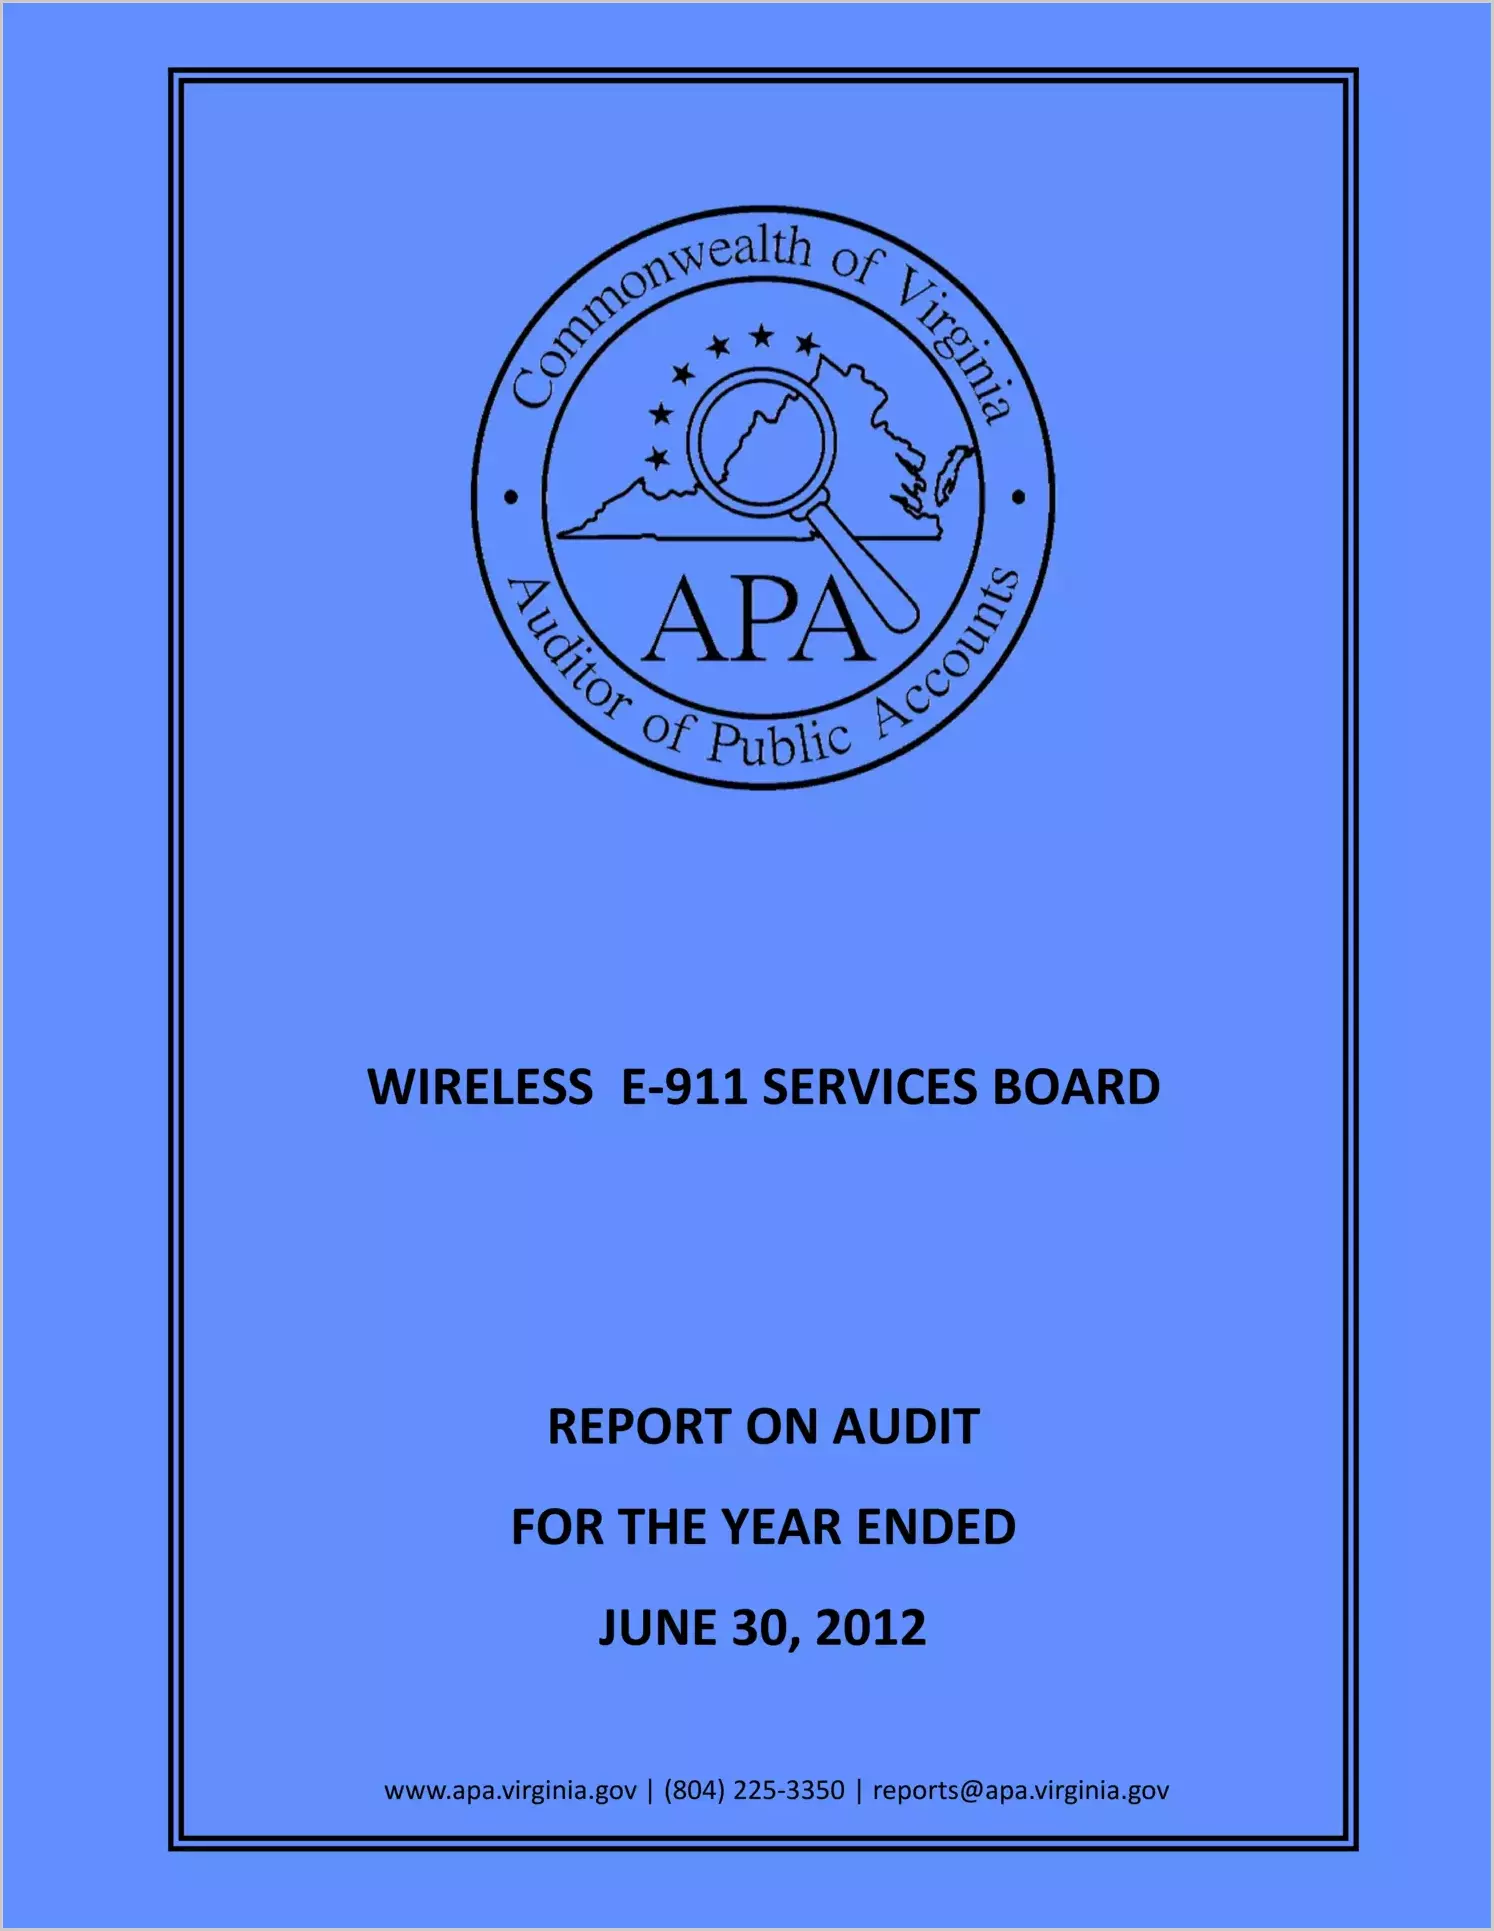 Wireless E-911 Services Board report on audit for the year ended June 30, 2012